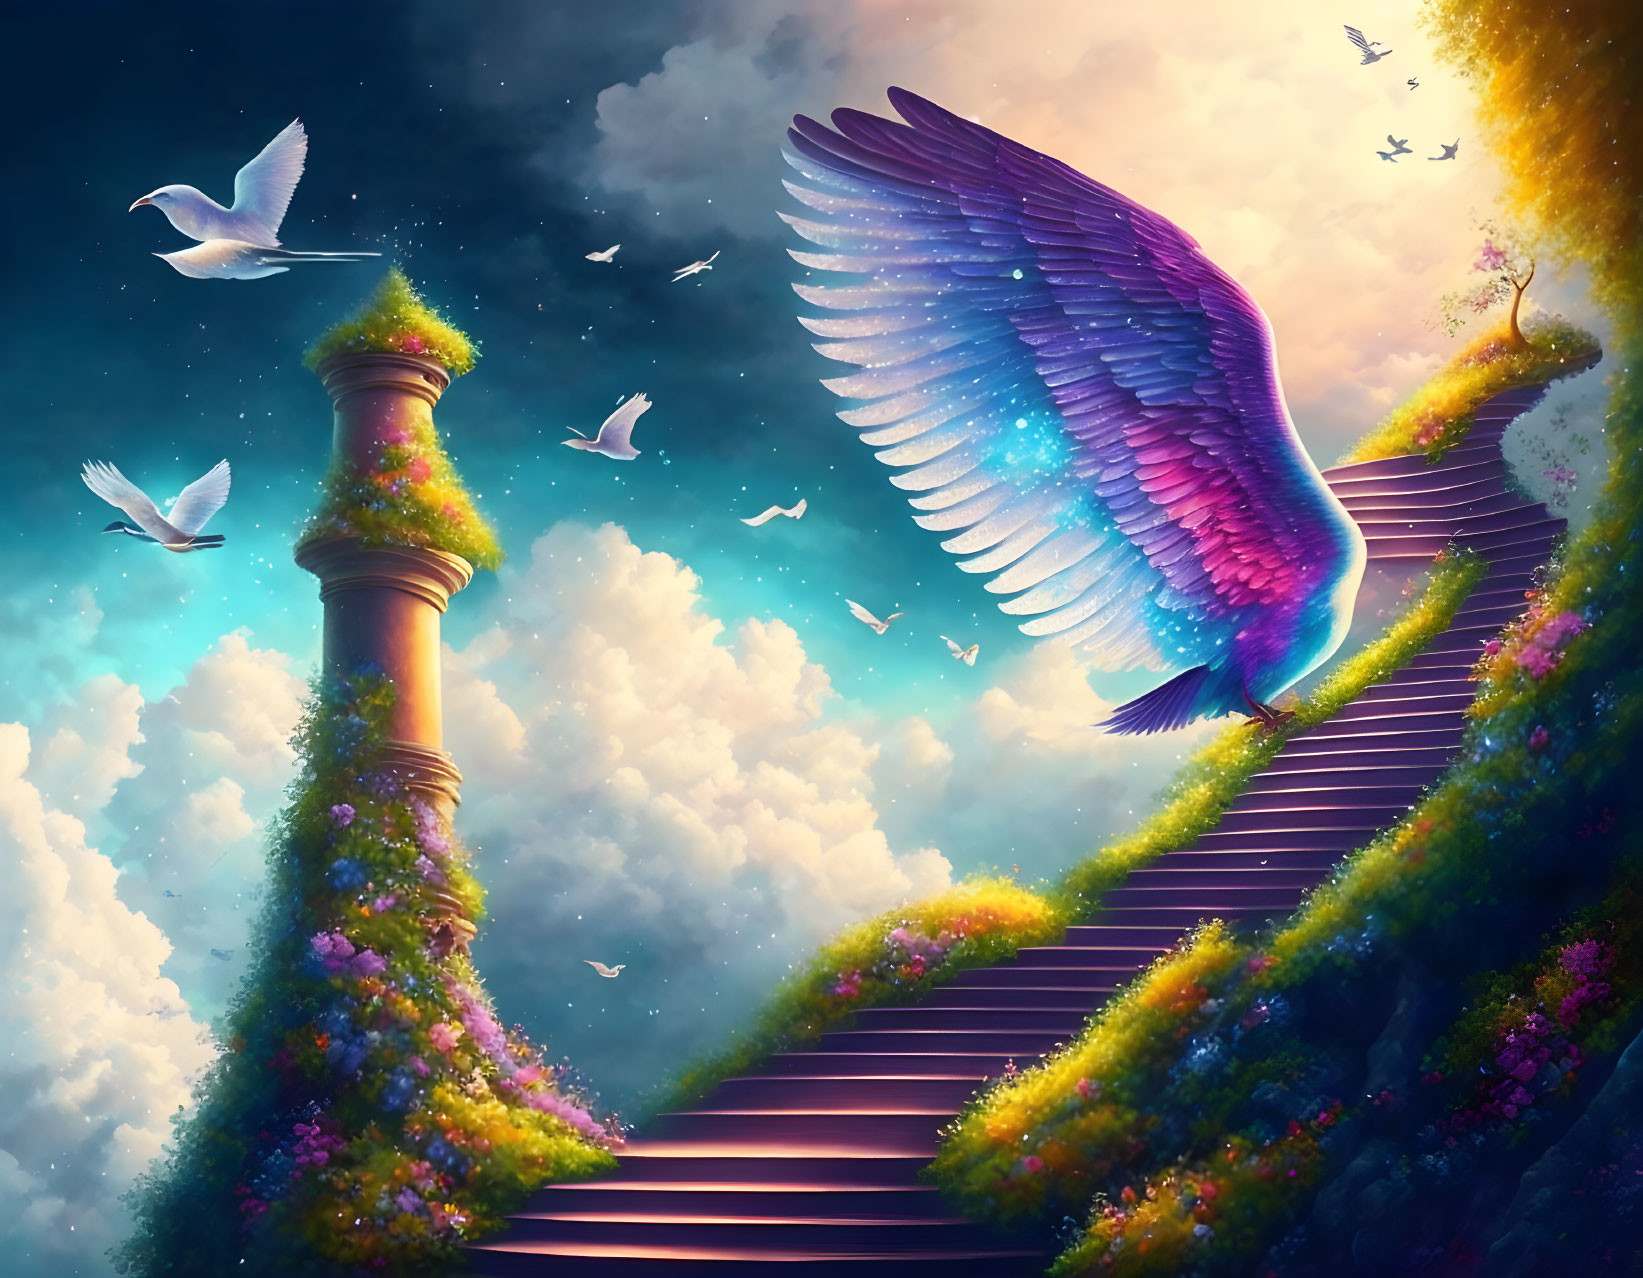 Giant bird on floral staircase with tower in fantasy scene